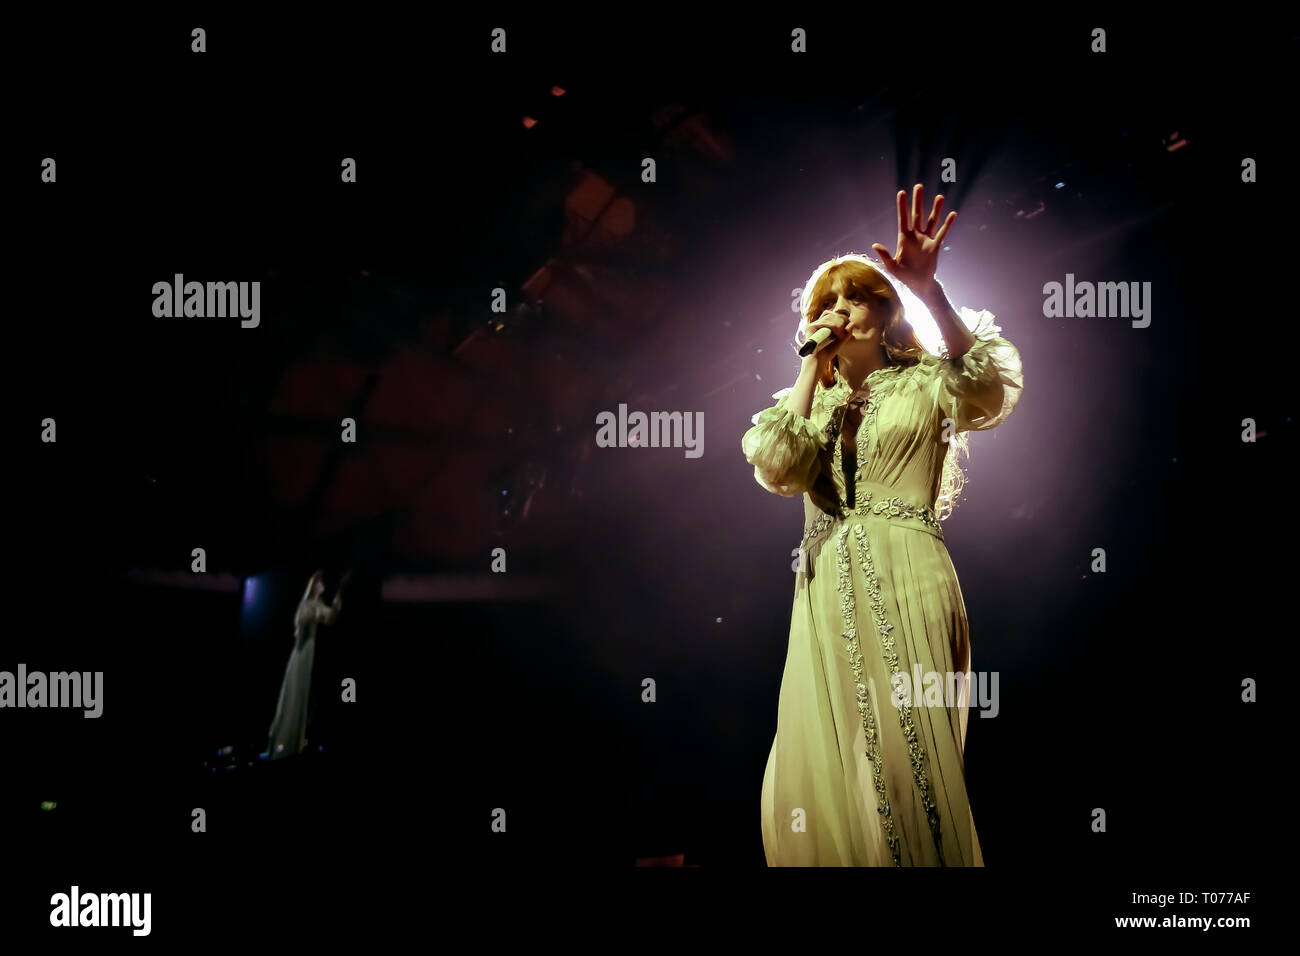 Bologna, Italy. 17th March, 2019. Florence + The Machine perform in their first date of the tour in Italy. Florence + The Machine are now for their new "High As Hope Tour". Luigi Rizzo/Alamy Live News Stock Photo